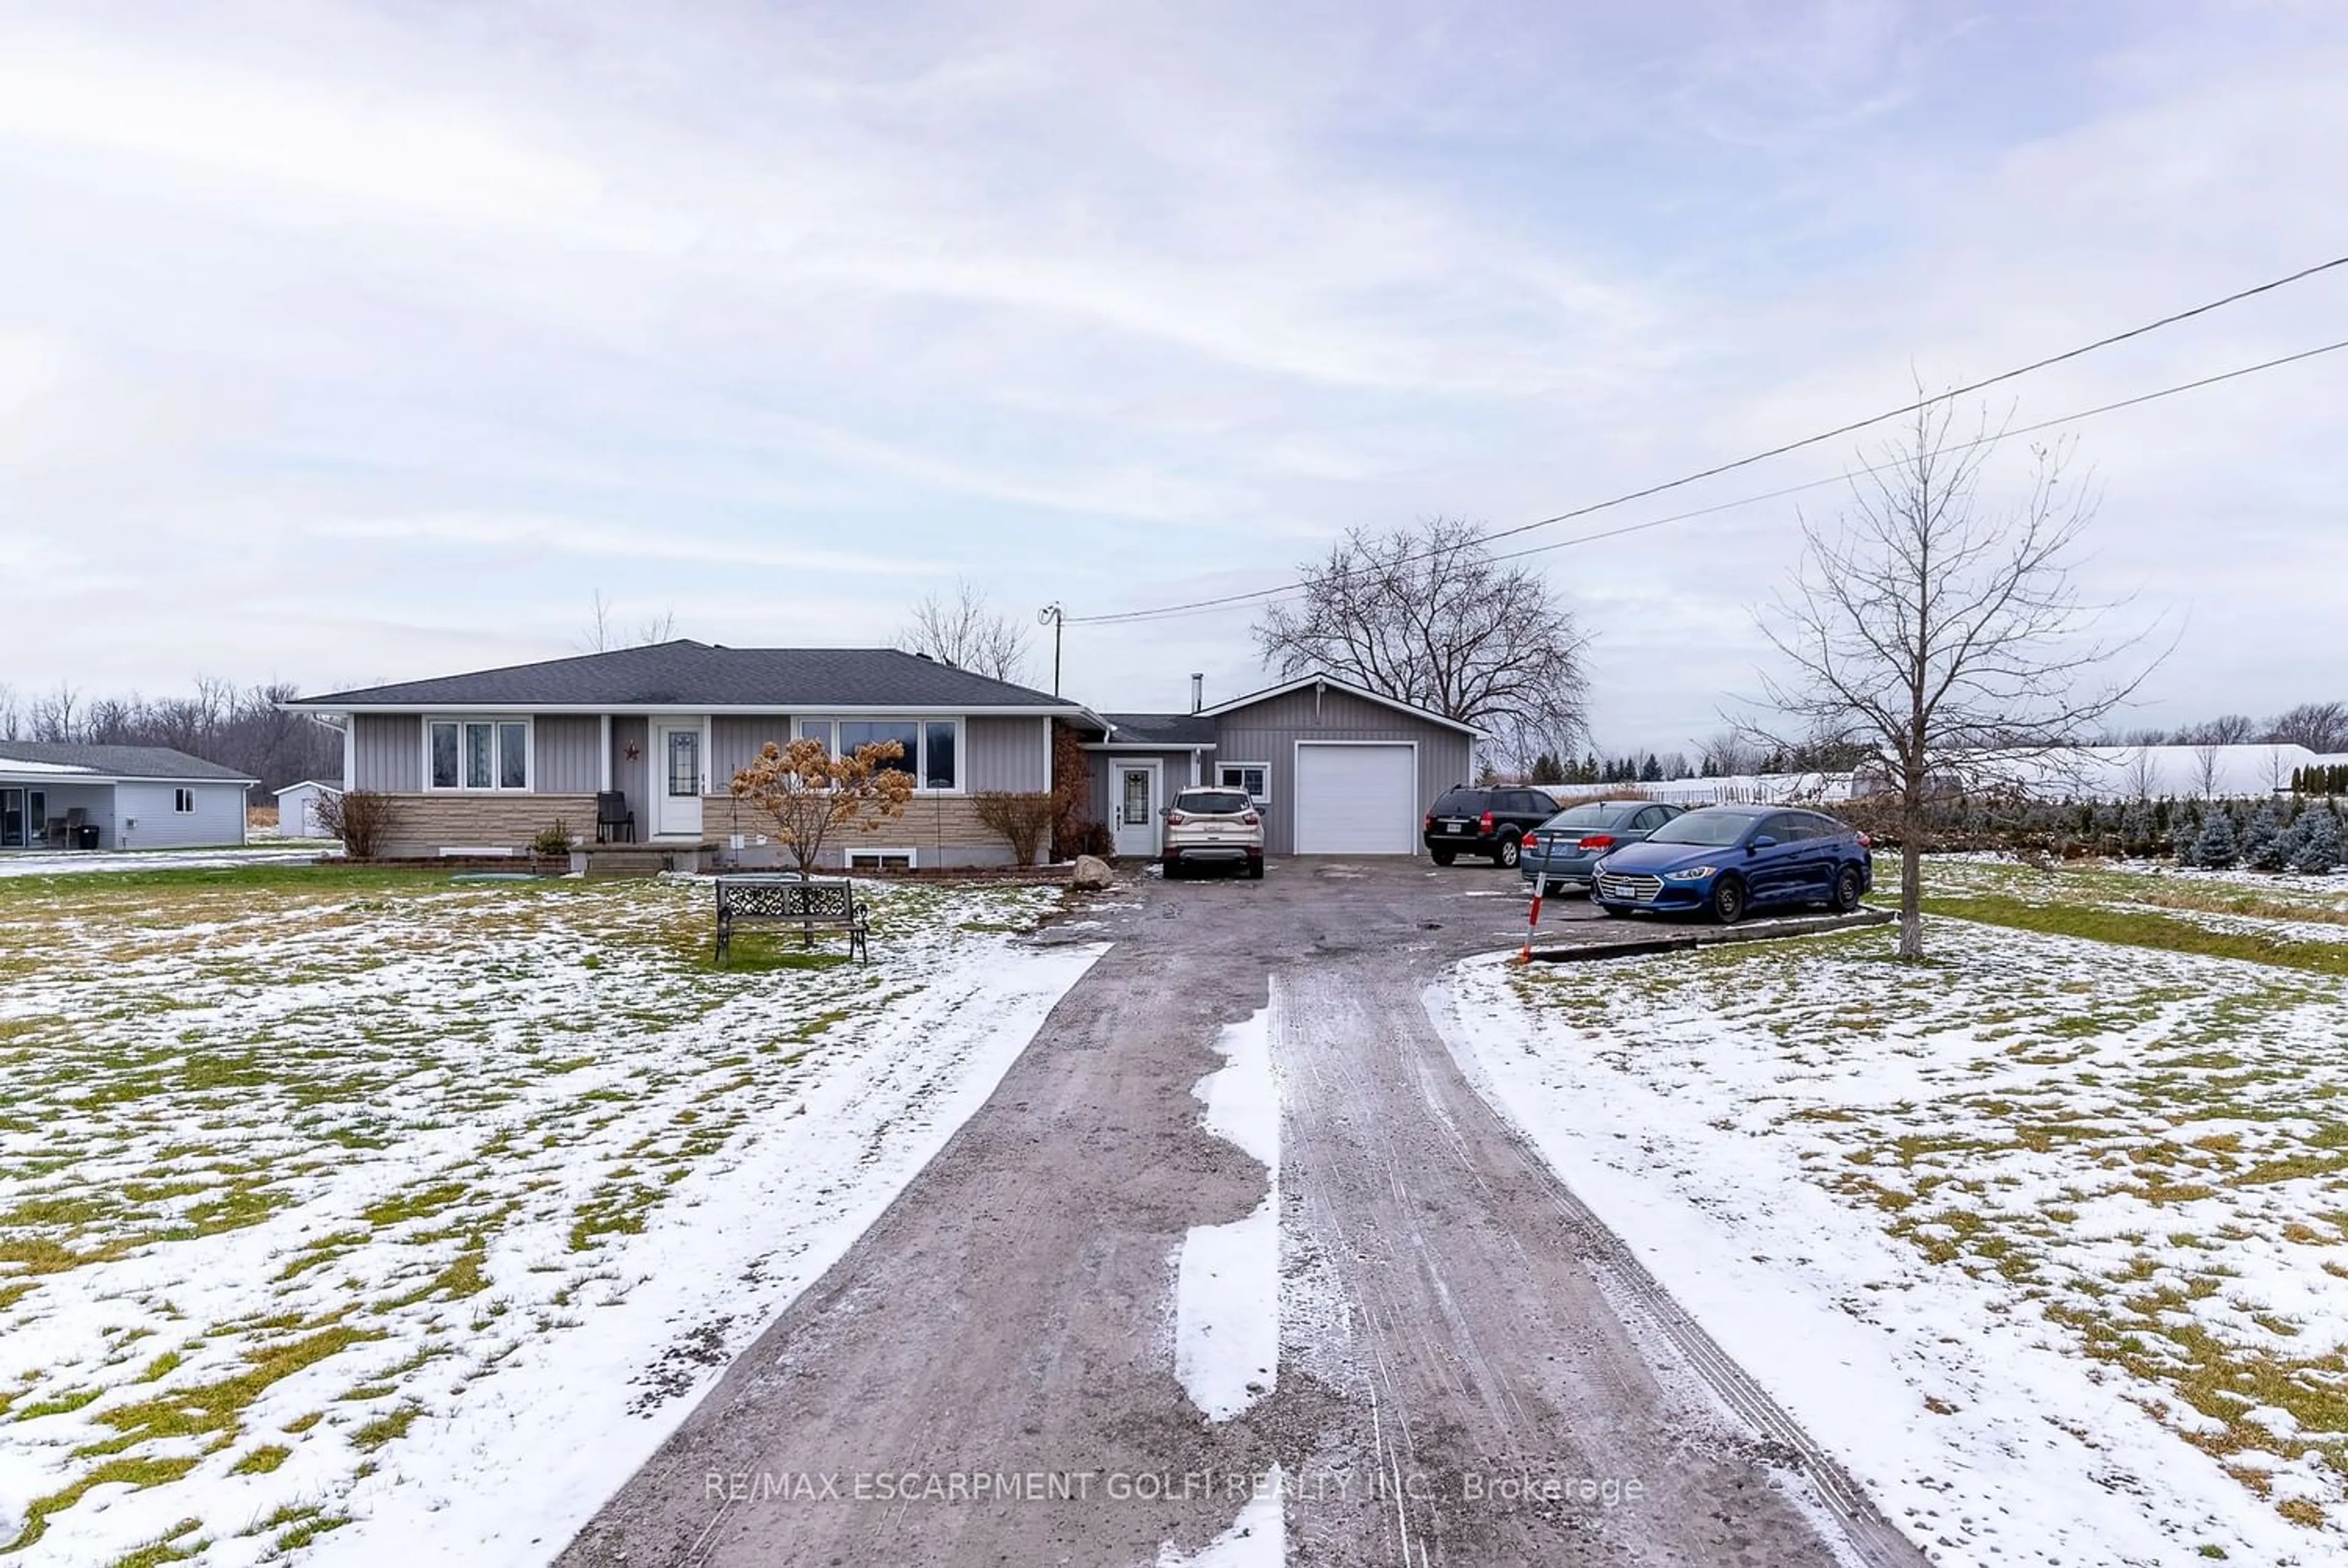 Street view for 226 Woolverton Rd, Grimsby Ontario L3M 4E7